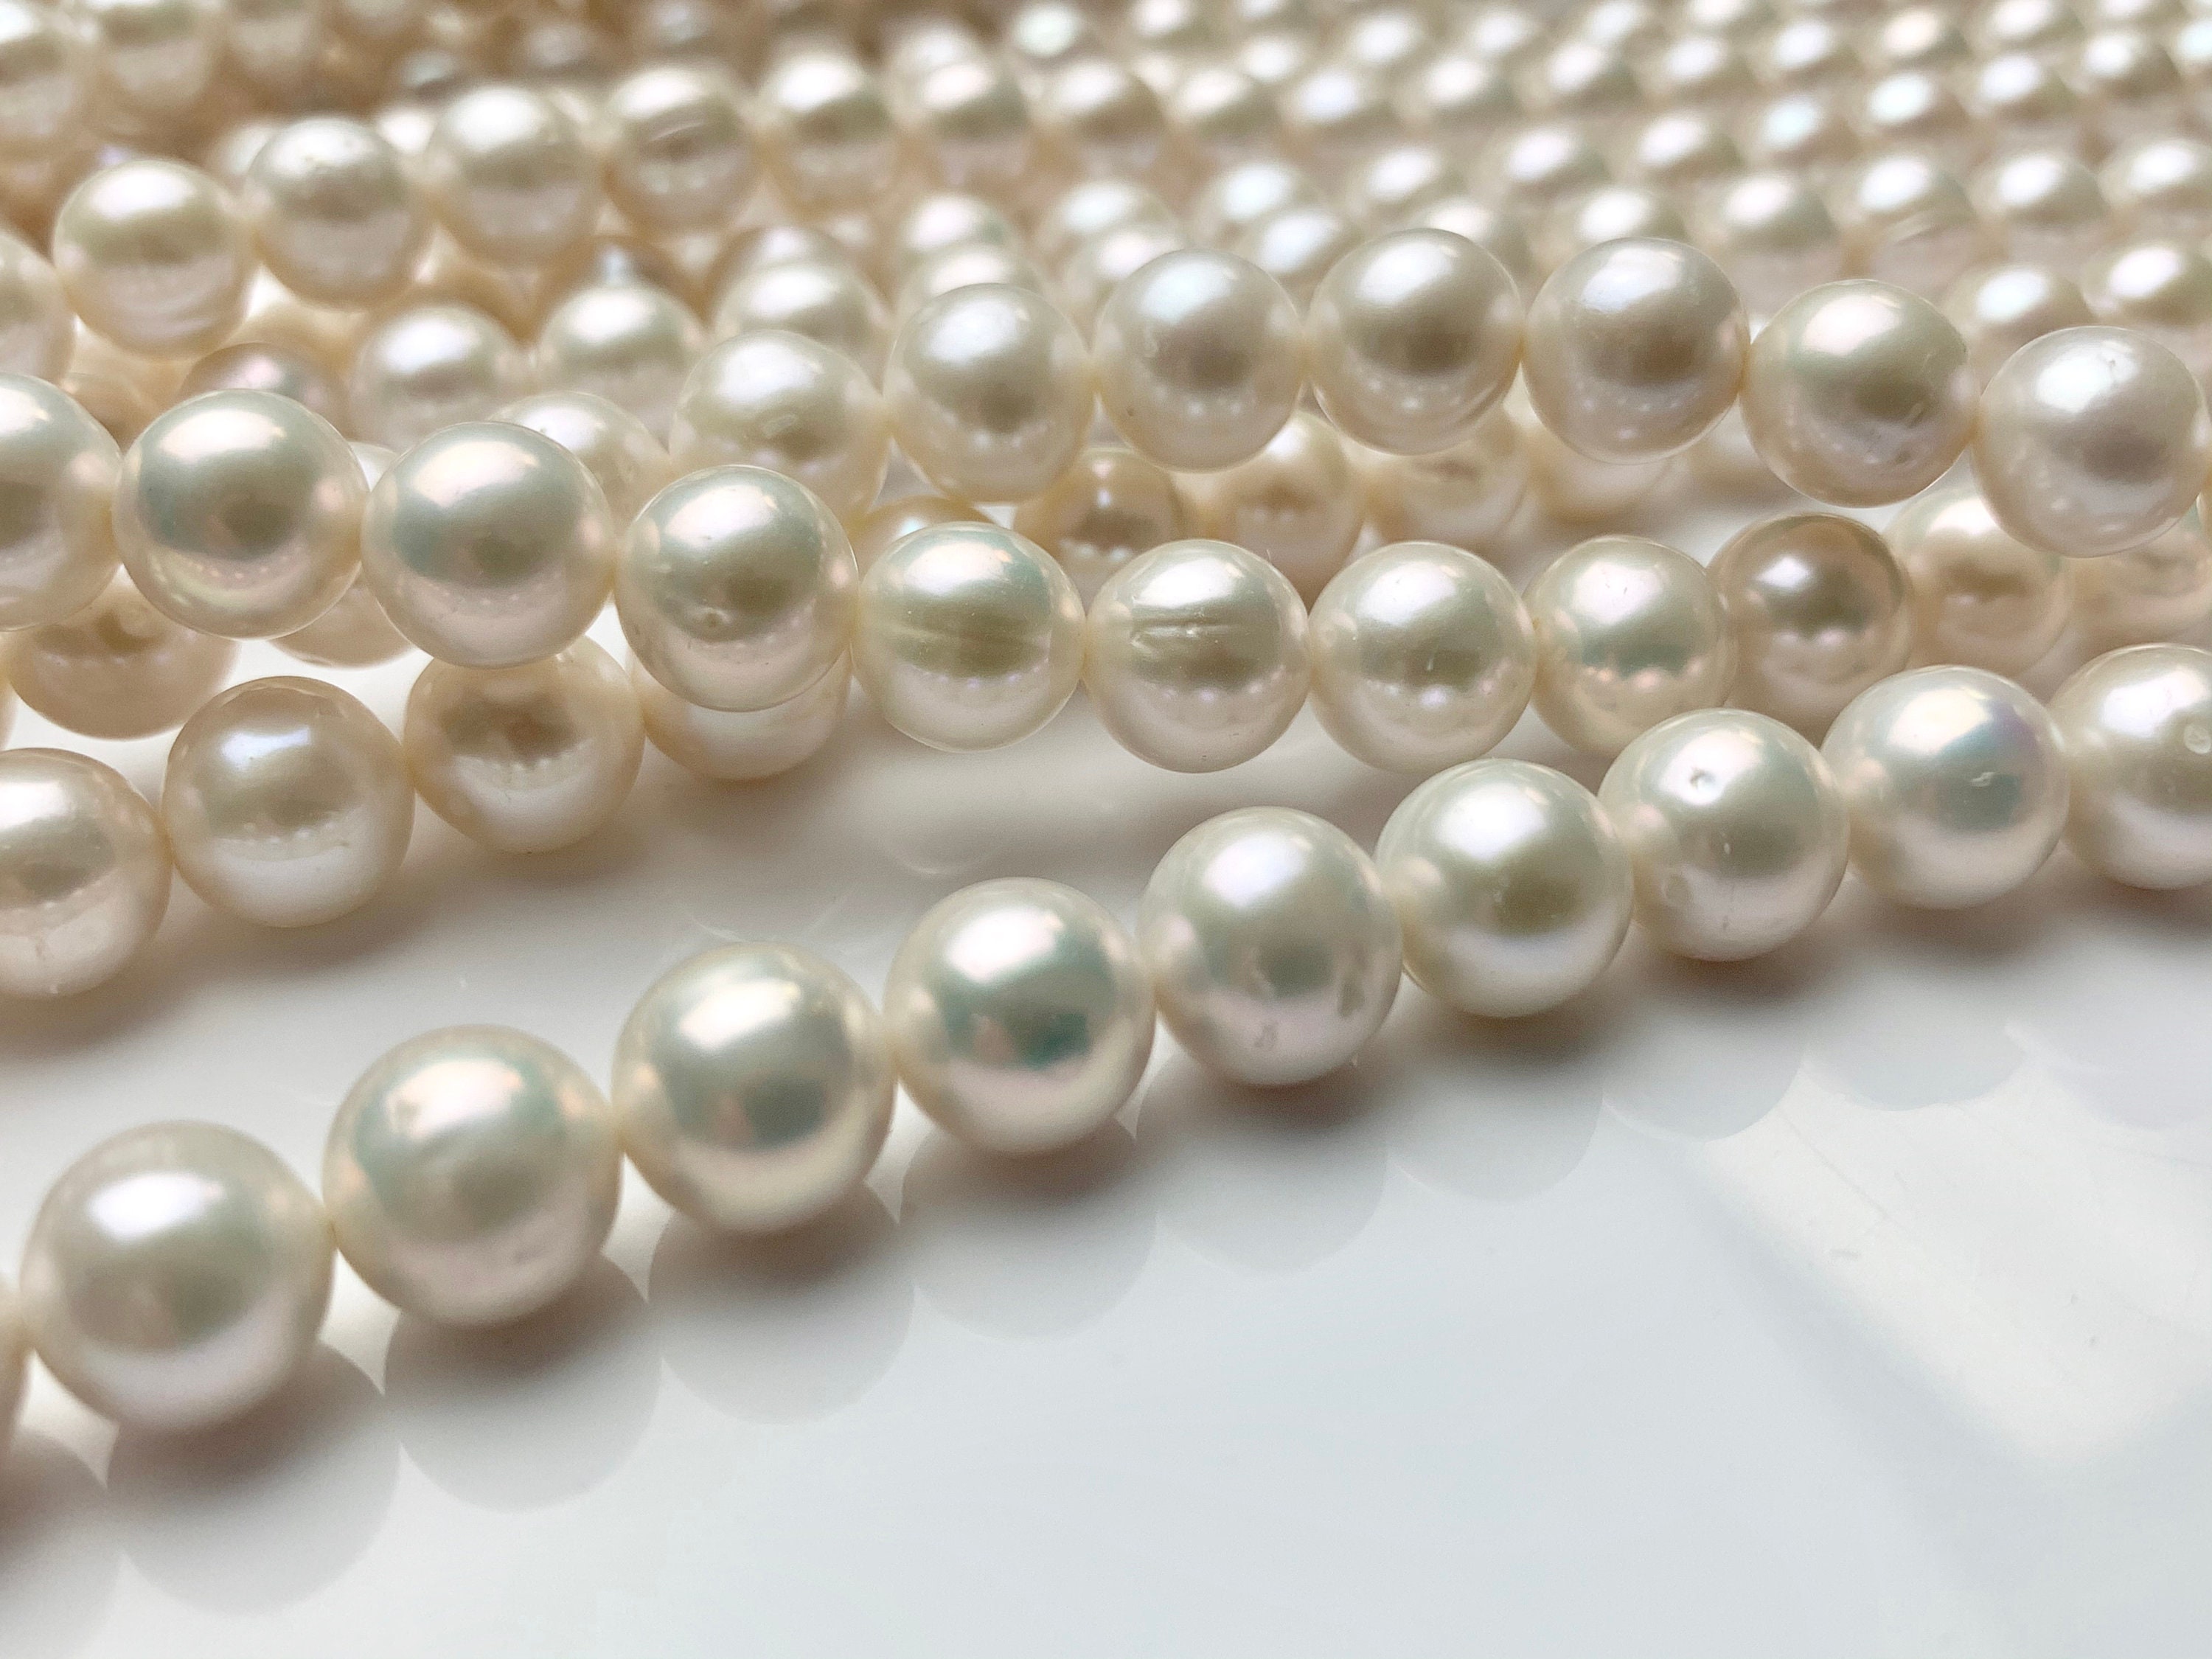 Adabele 1 Strand Real Natural AAA Grade Round White Cultured Freshwater  Pearl Loose Beads 6-7mm for Jewelry Making 14 inch FPA-67